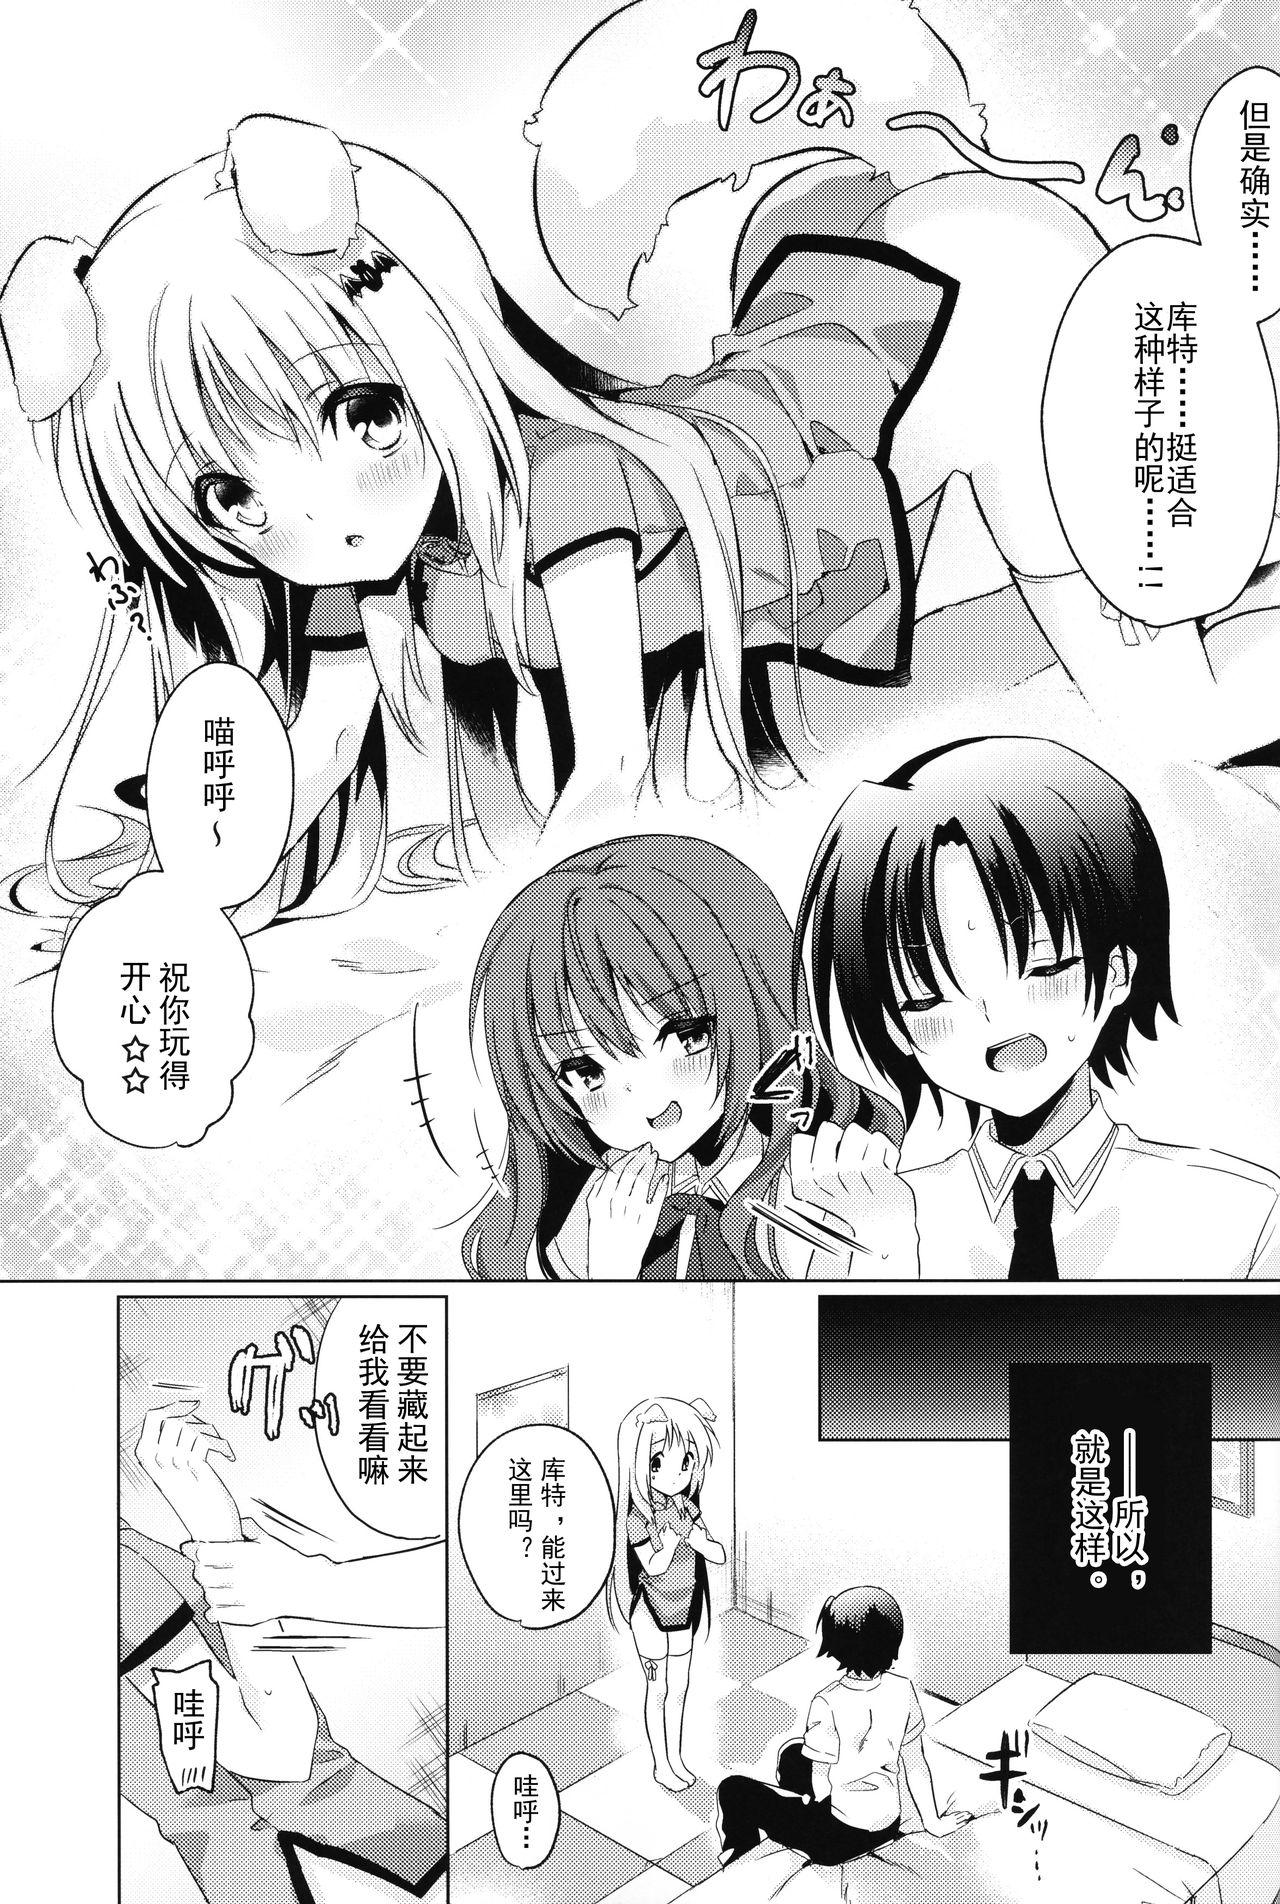 Sapphic Erotica Kud After4 - Little busters Movie - Page 7